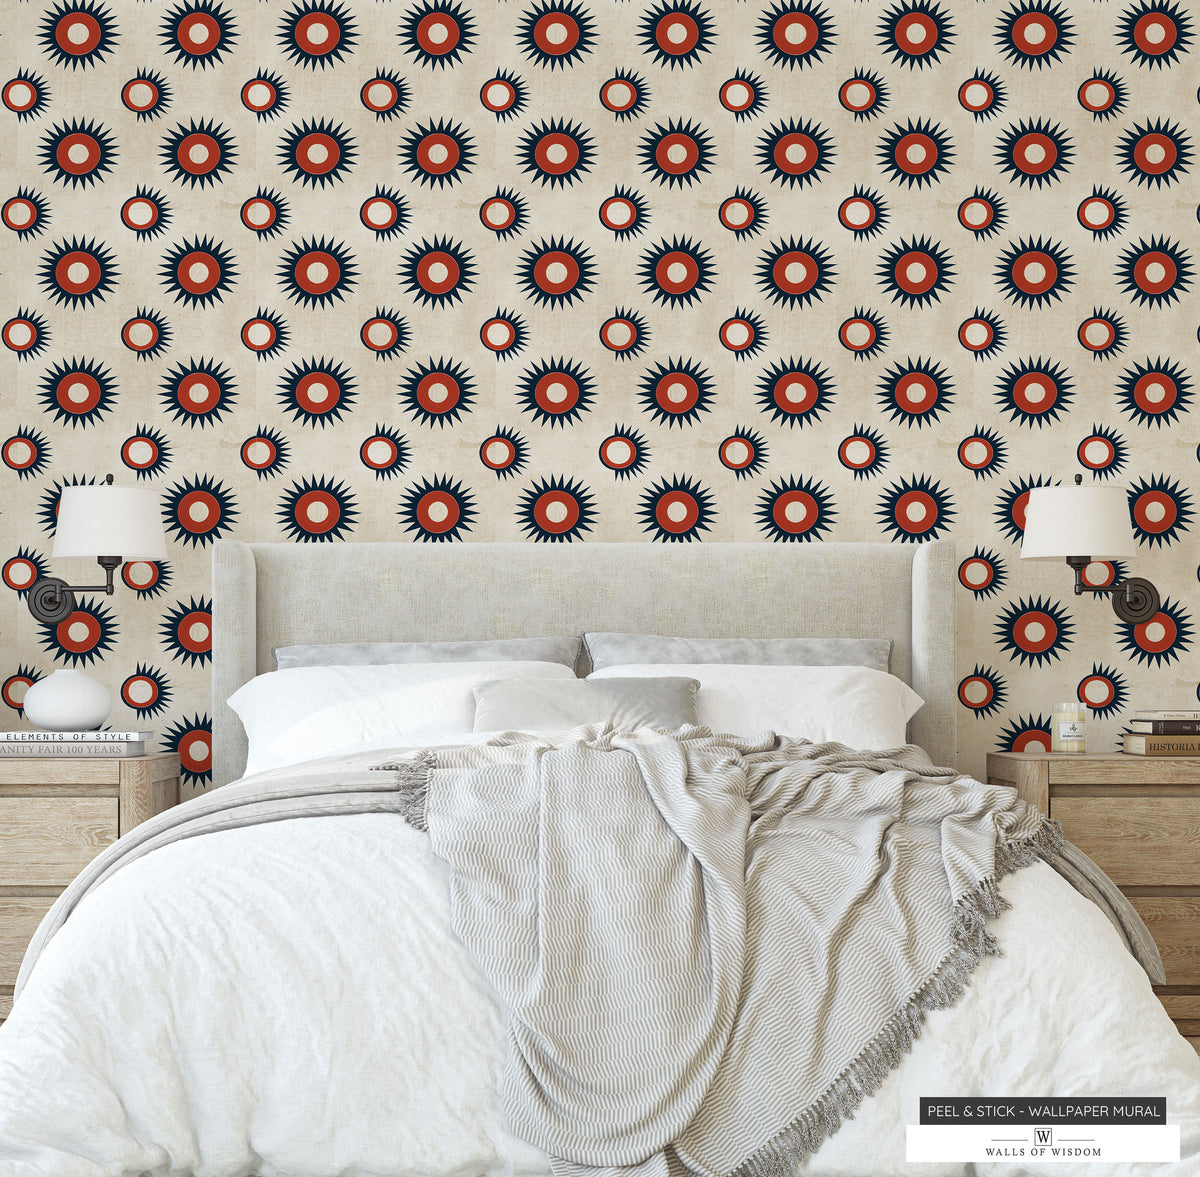 Retro Rustic Western Peel & Stick Wallpaper Perfect for Modern Western and Farmhouse Interiors